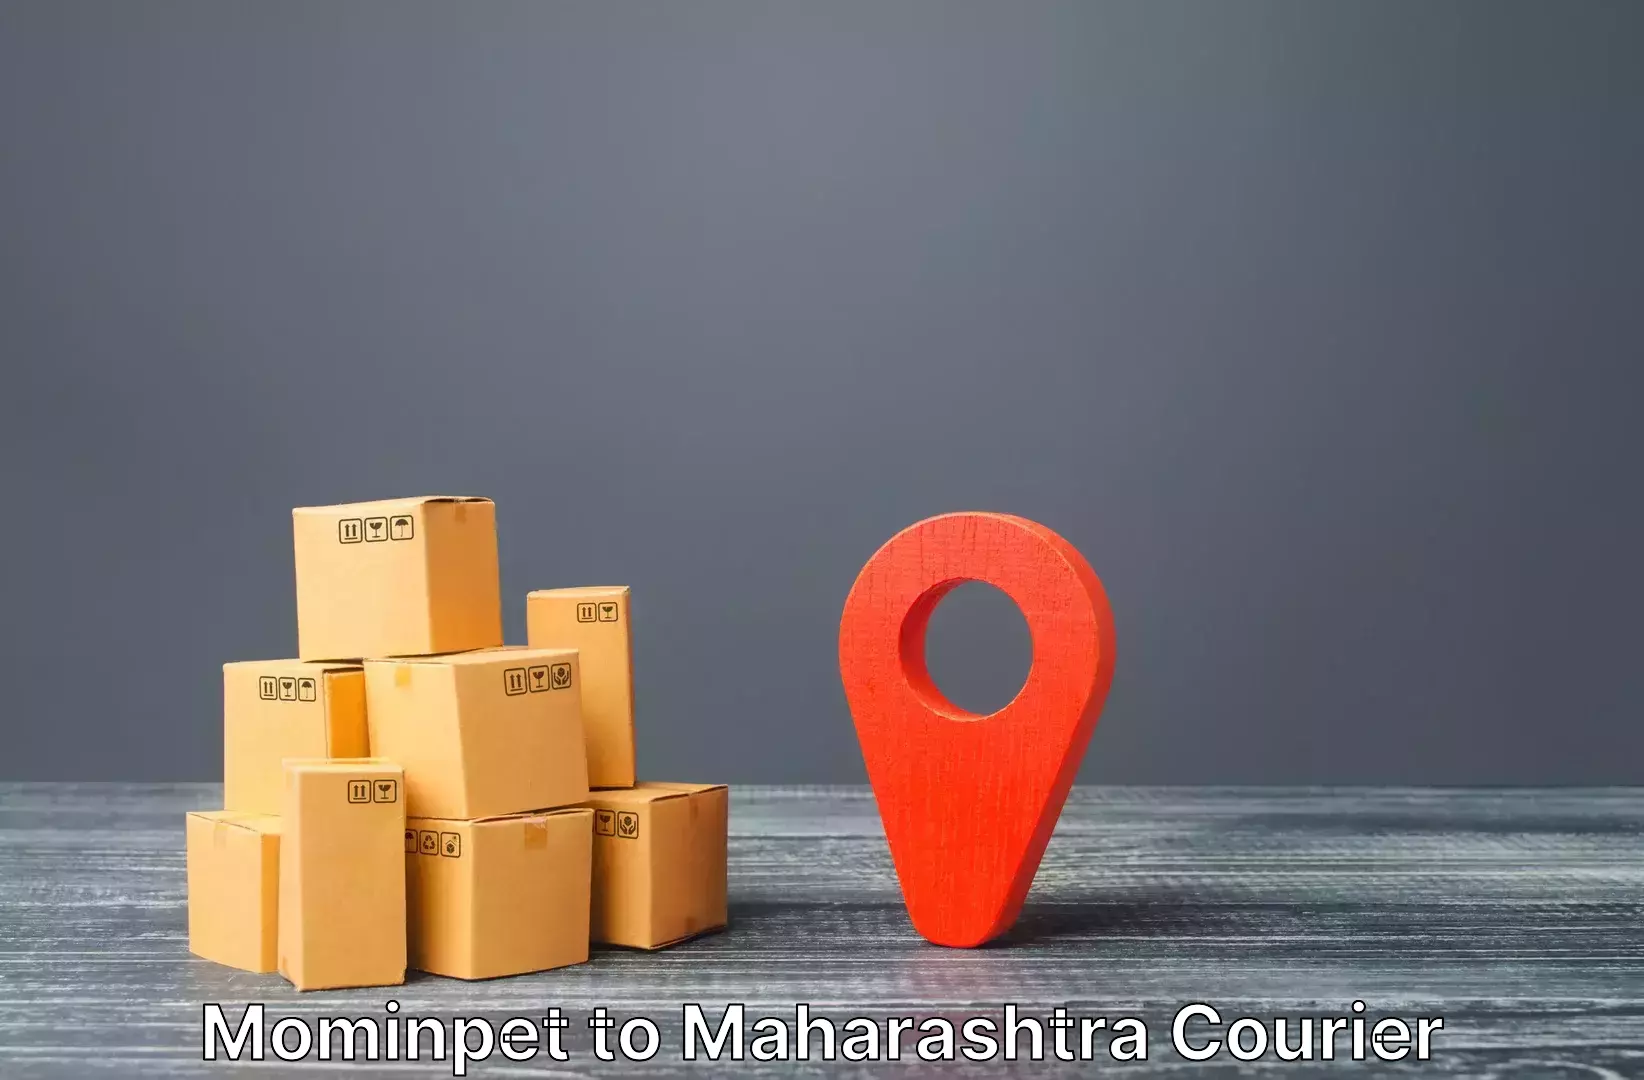 Luggage shipment tracking Mominpet to Chembur